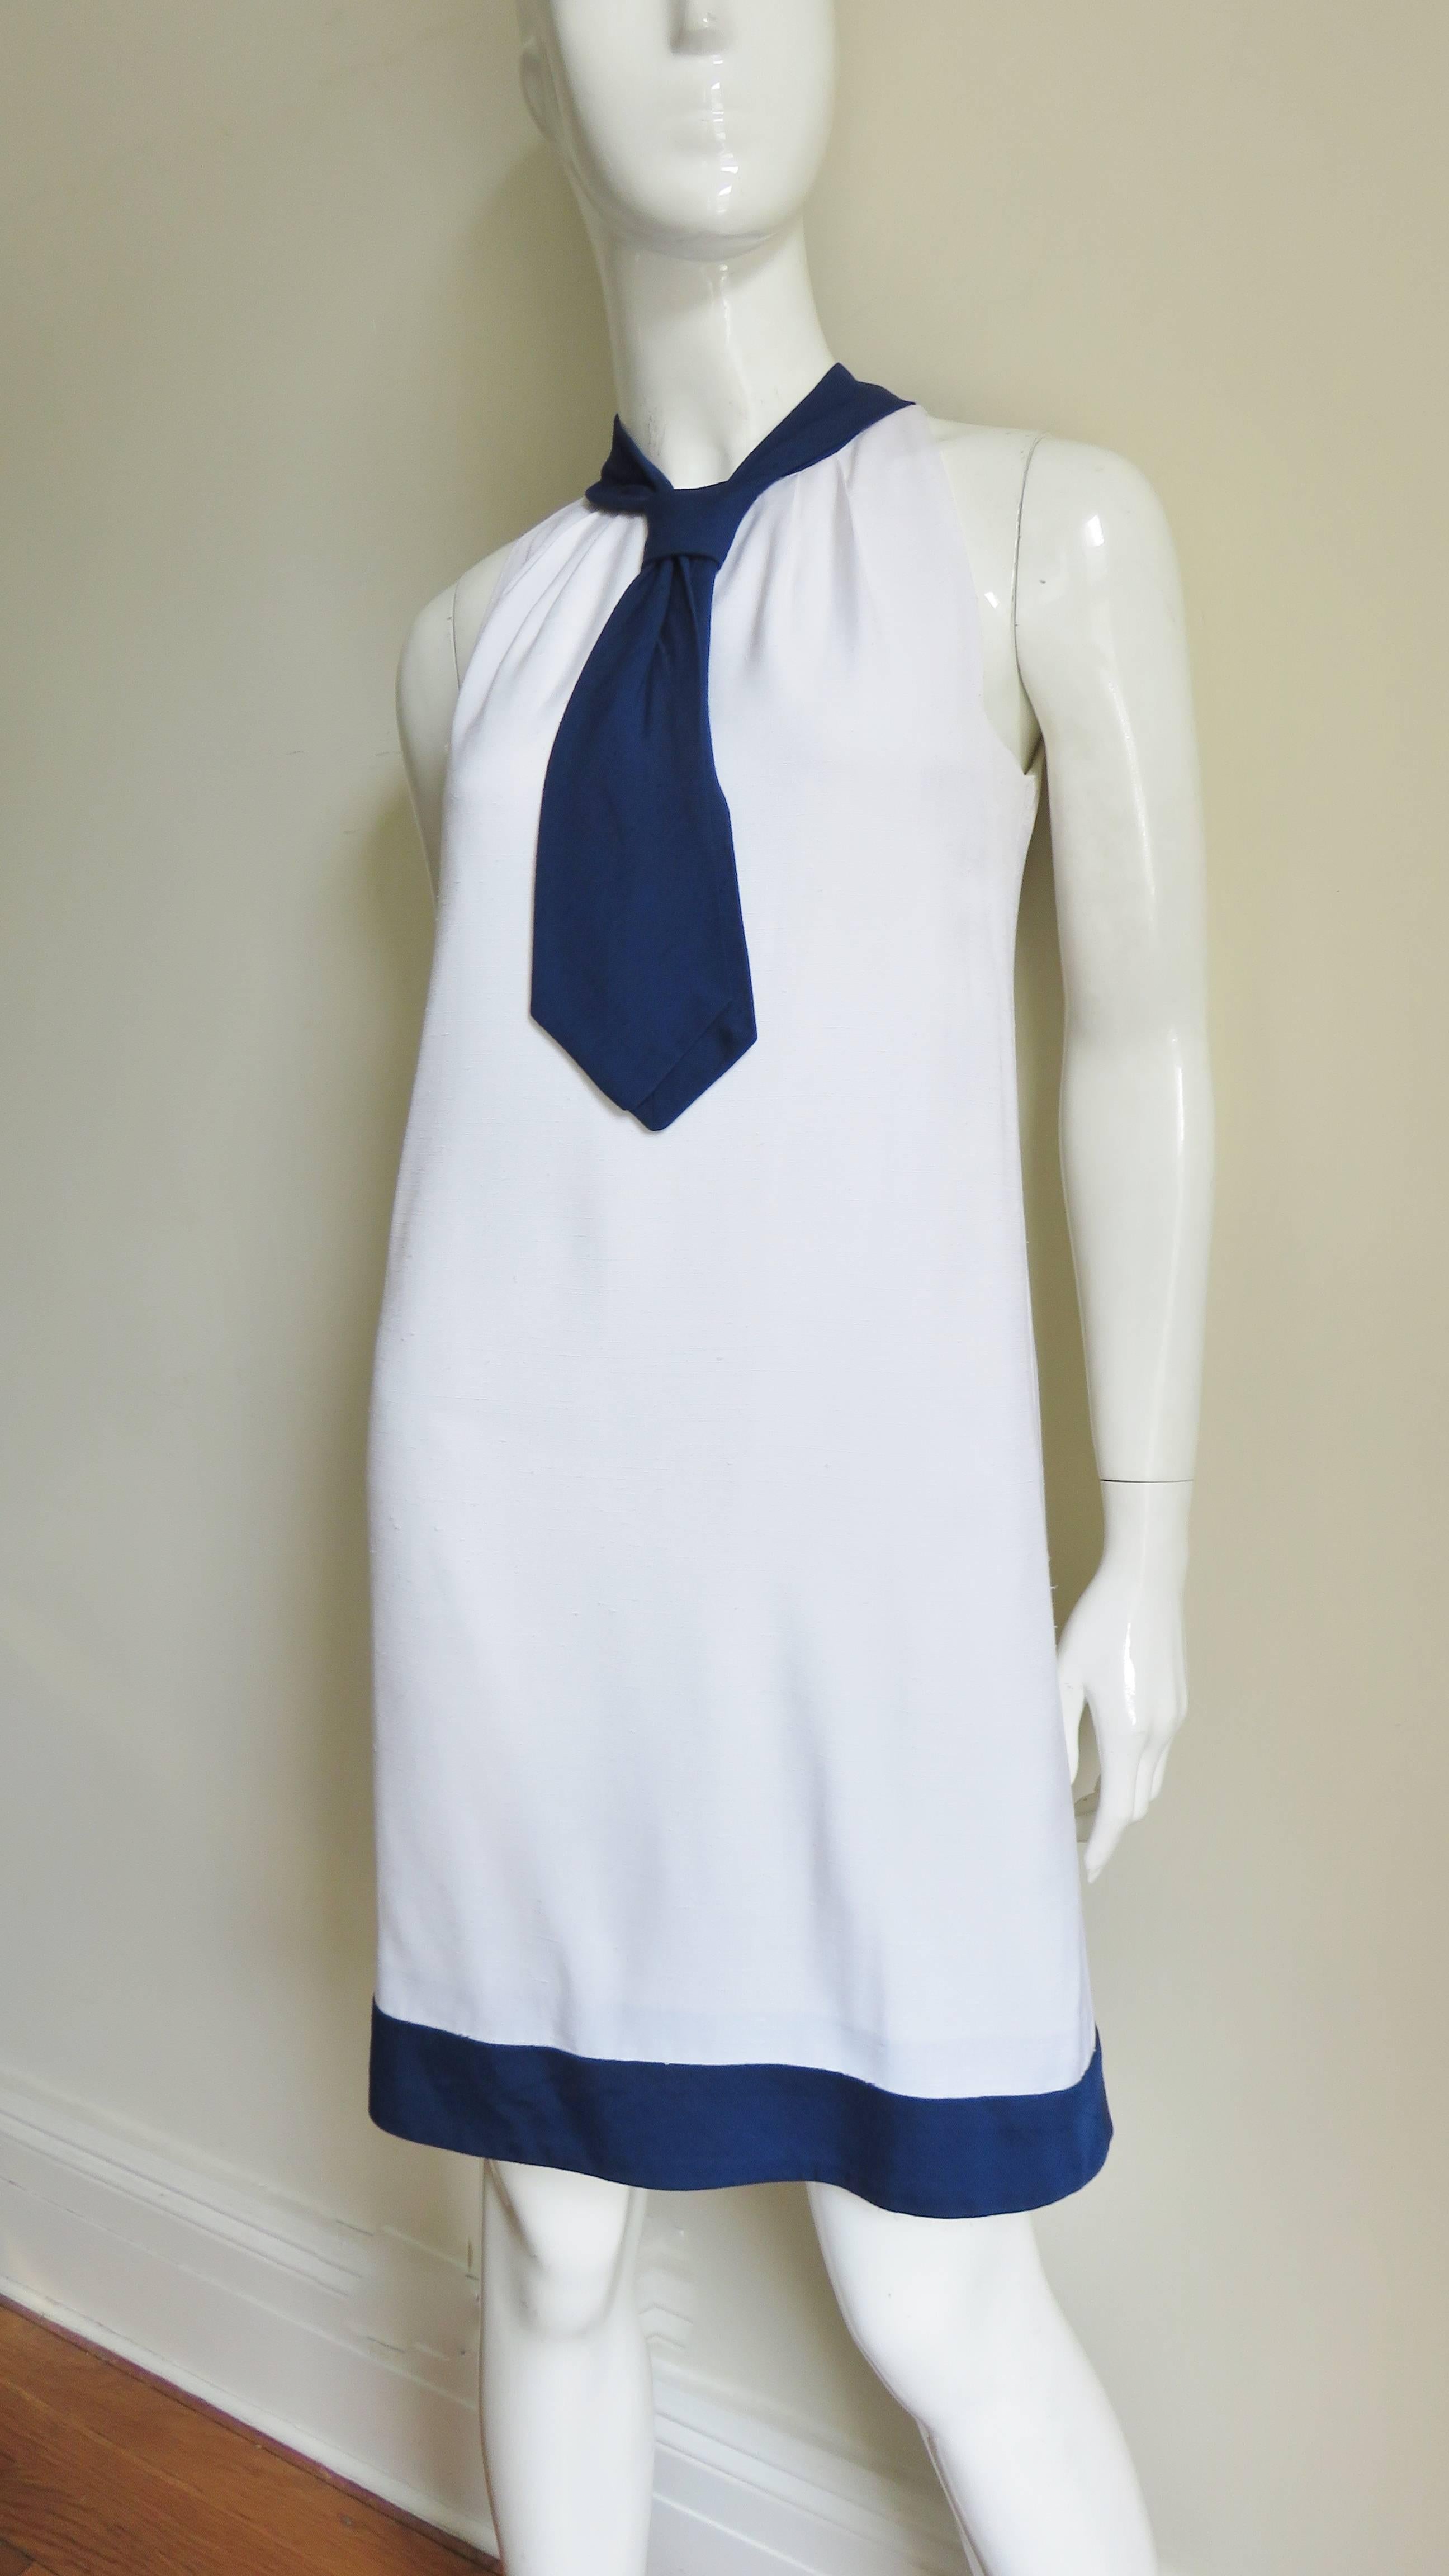 A great white and navy linen blend dress from Pierre Cardin. It is sleeveless with a band of navy around the hem and the neck forming a tie. The shoulders are cut in and the dress gathers slightly at the neck then flares subtly towards the hem.  It